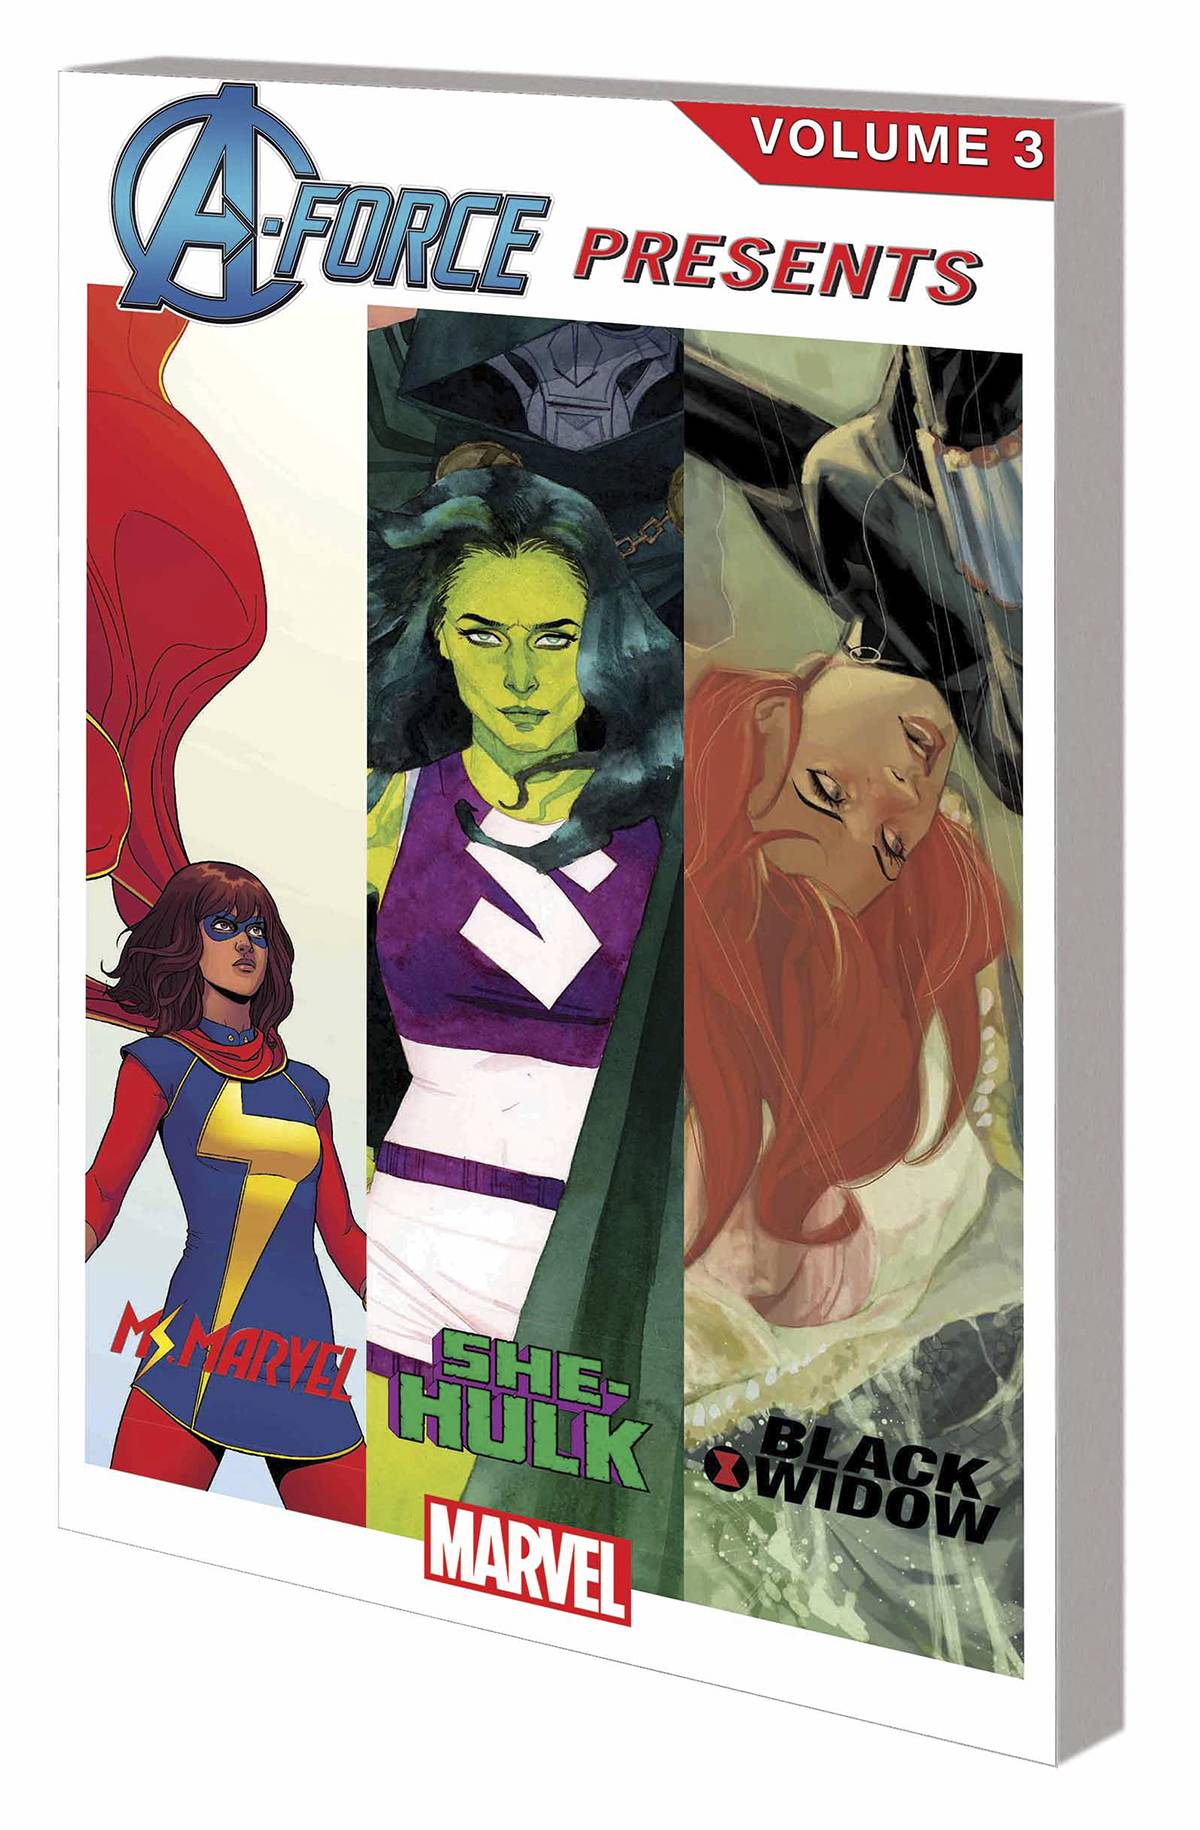 A-Force Presents Graphic Novel Volume 3